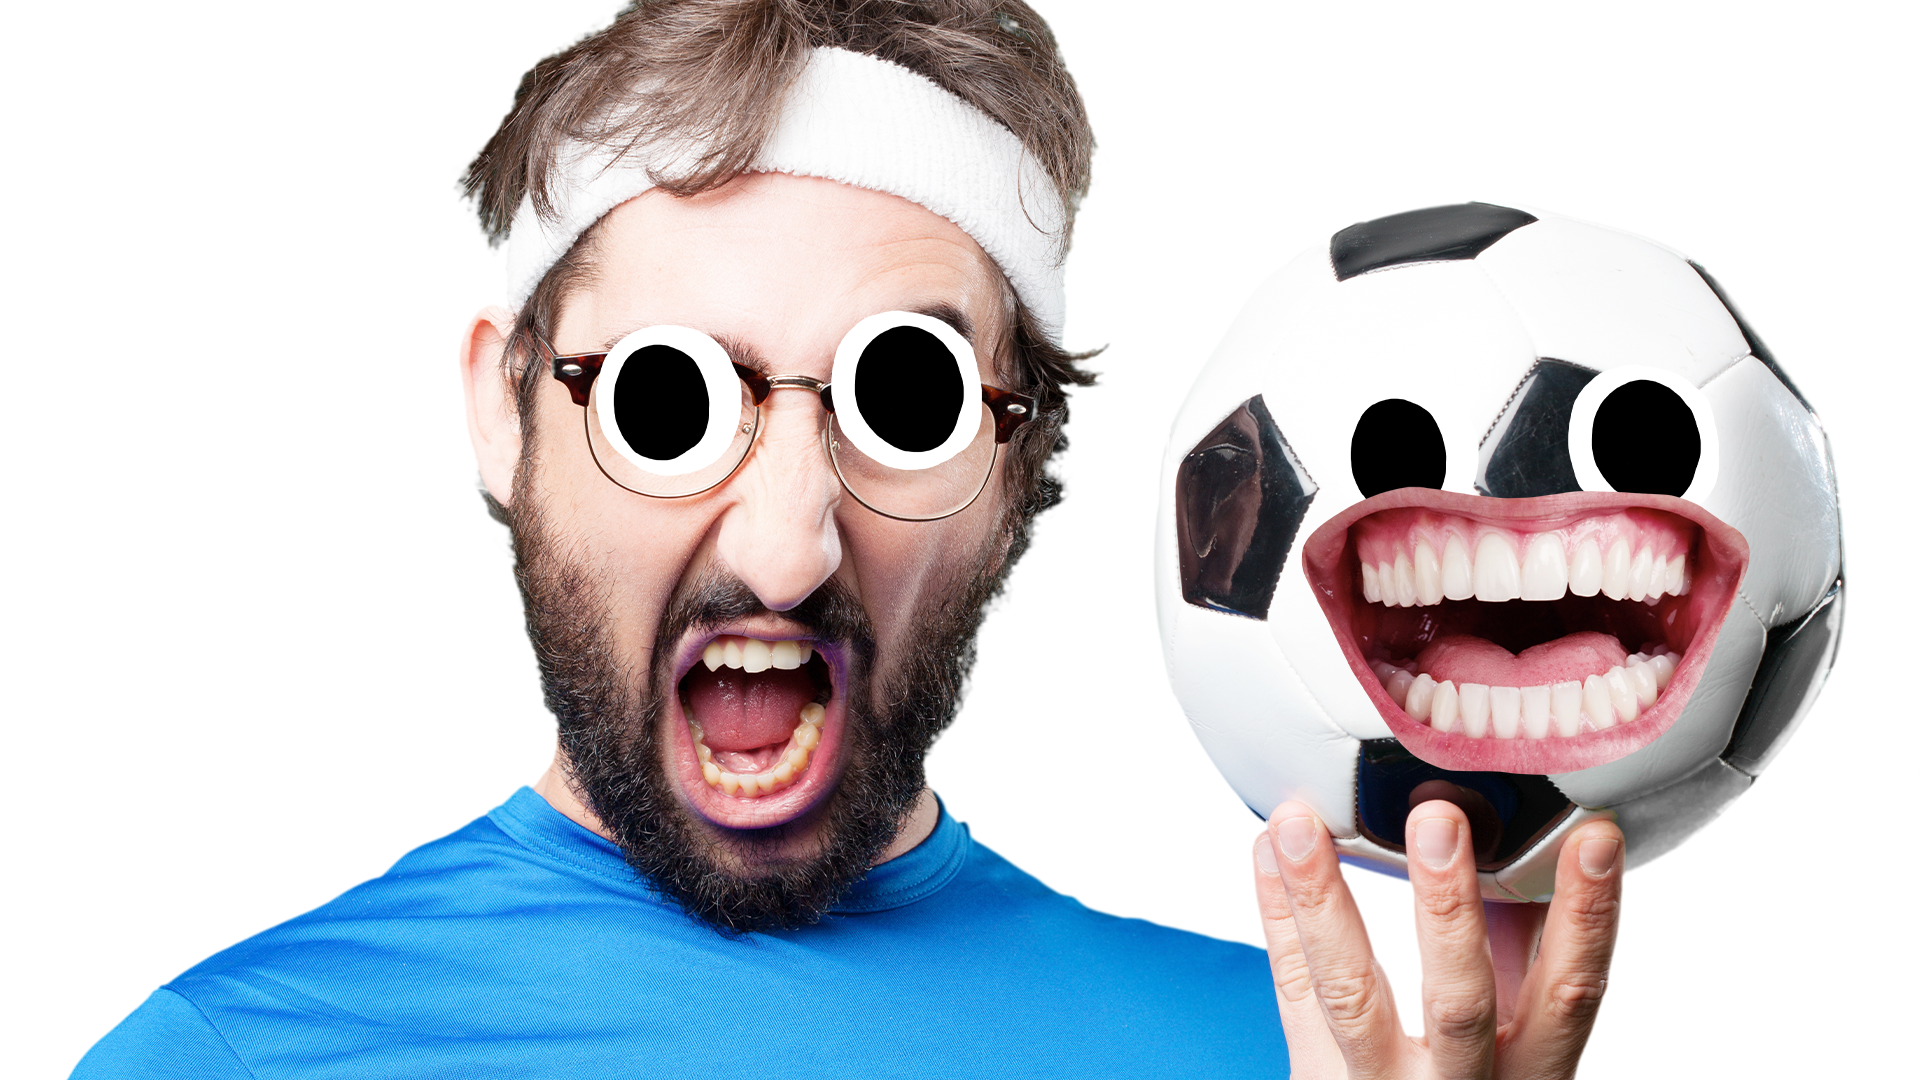 Goofy man holding football with face on white background